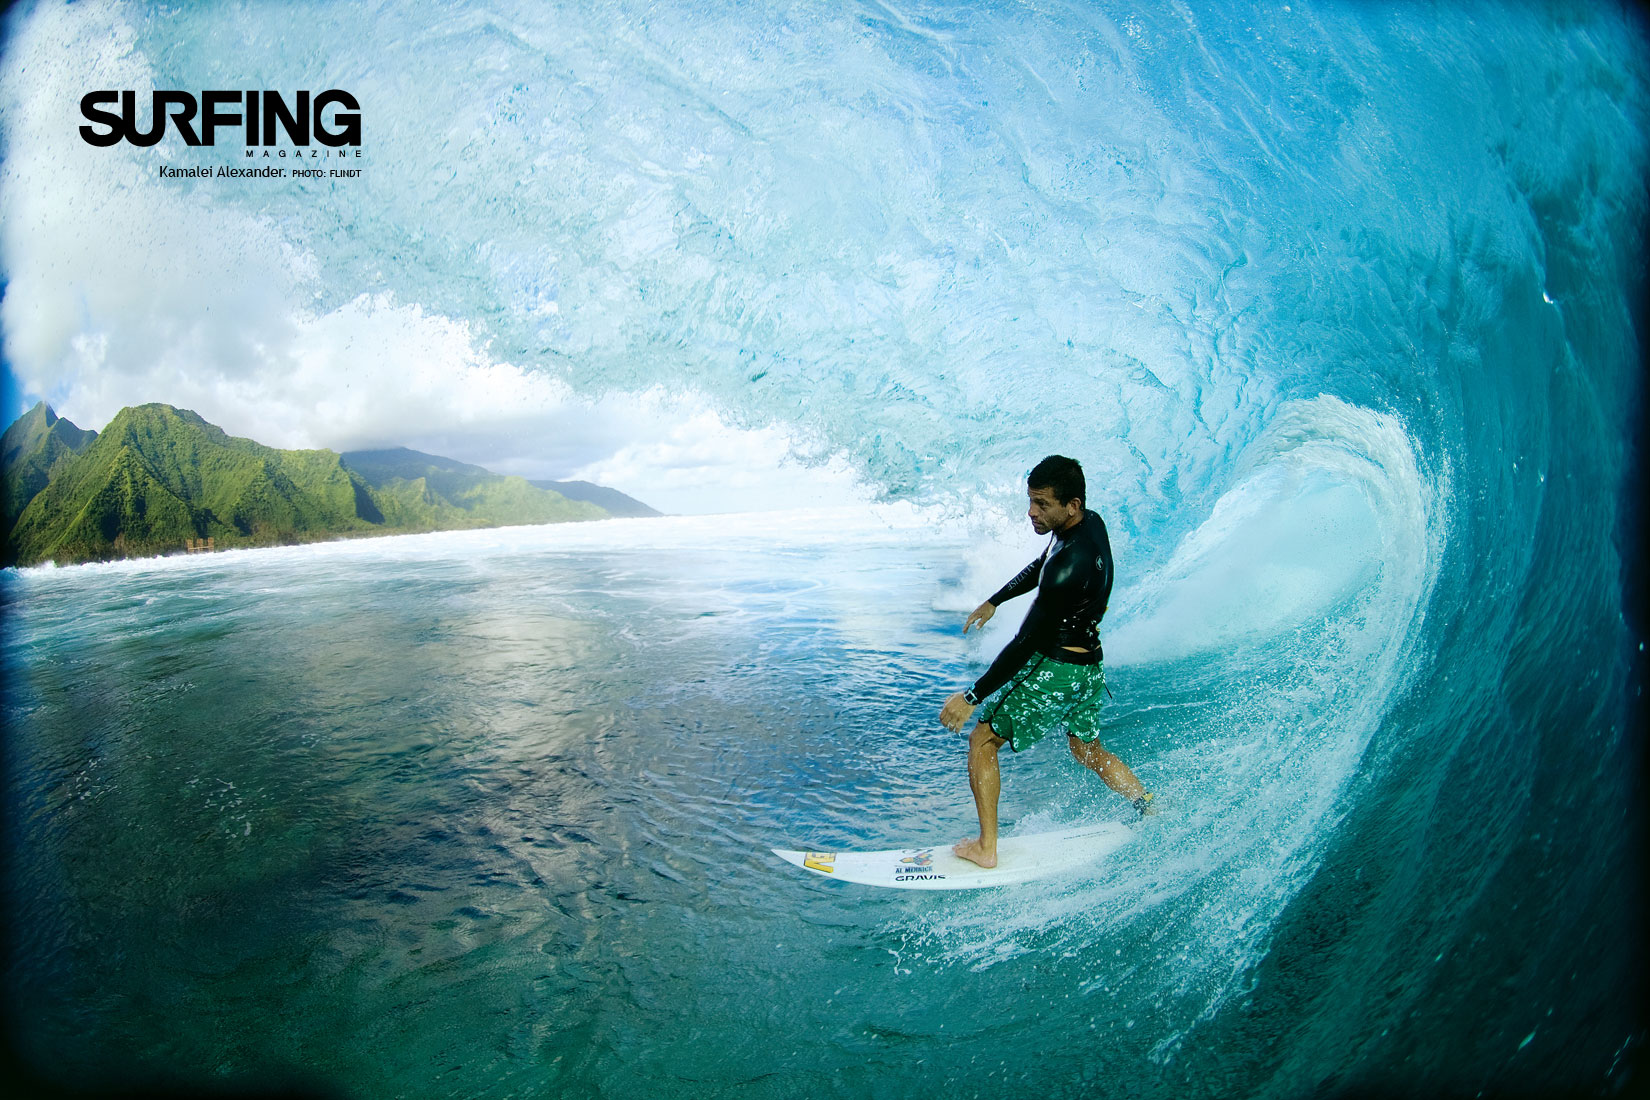 Surfing Magazine January Issue Wallpaper Pictures